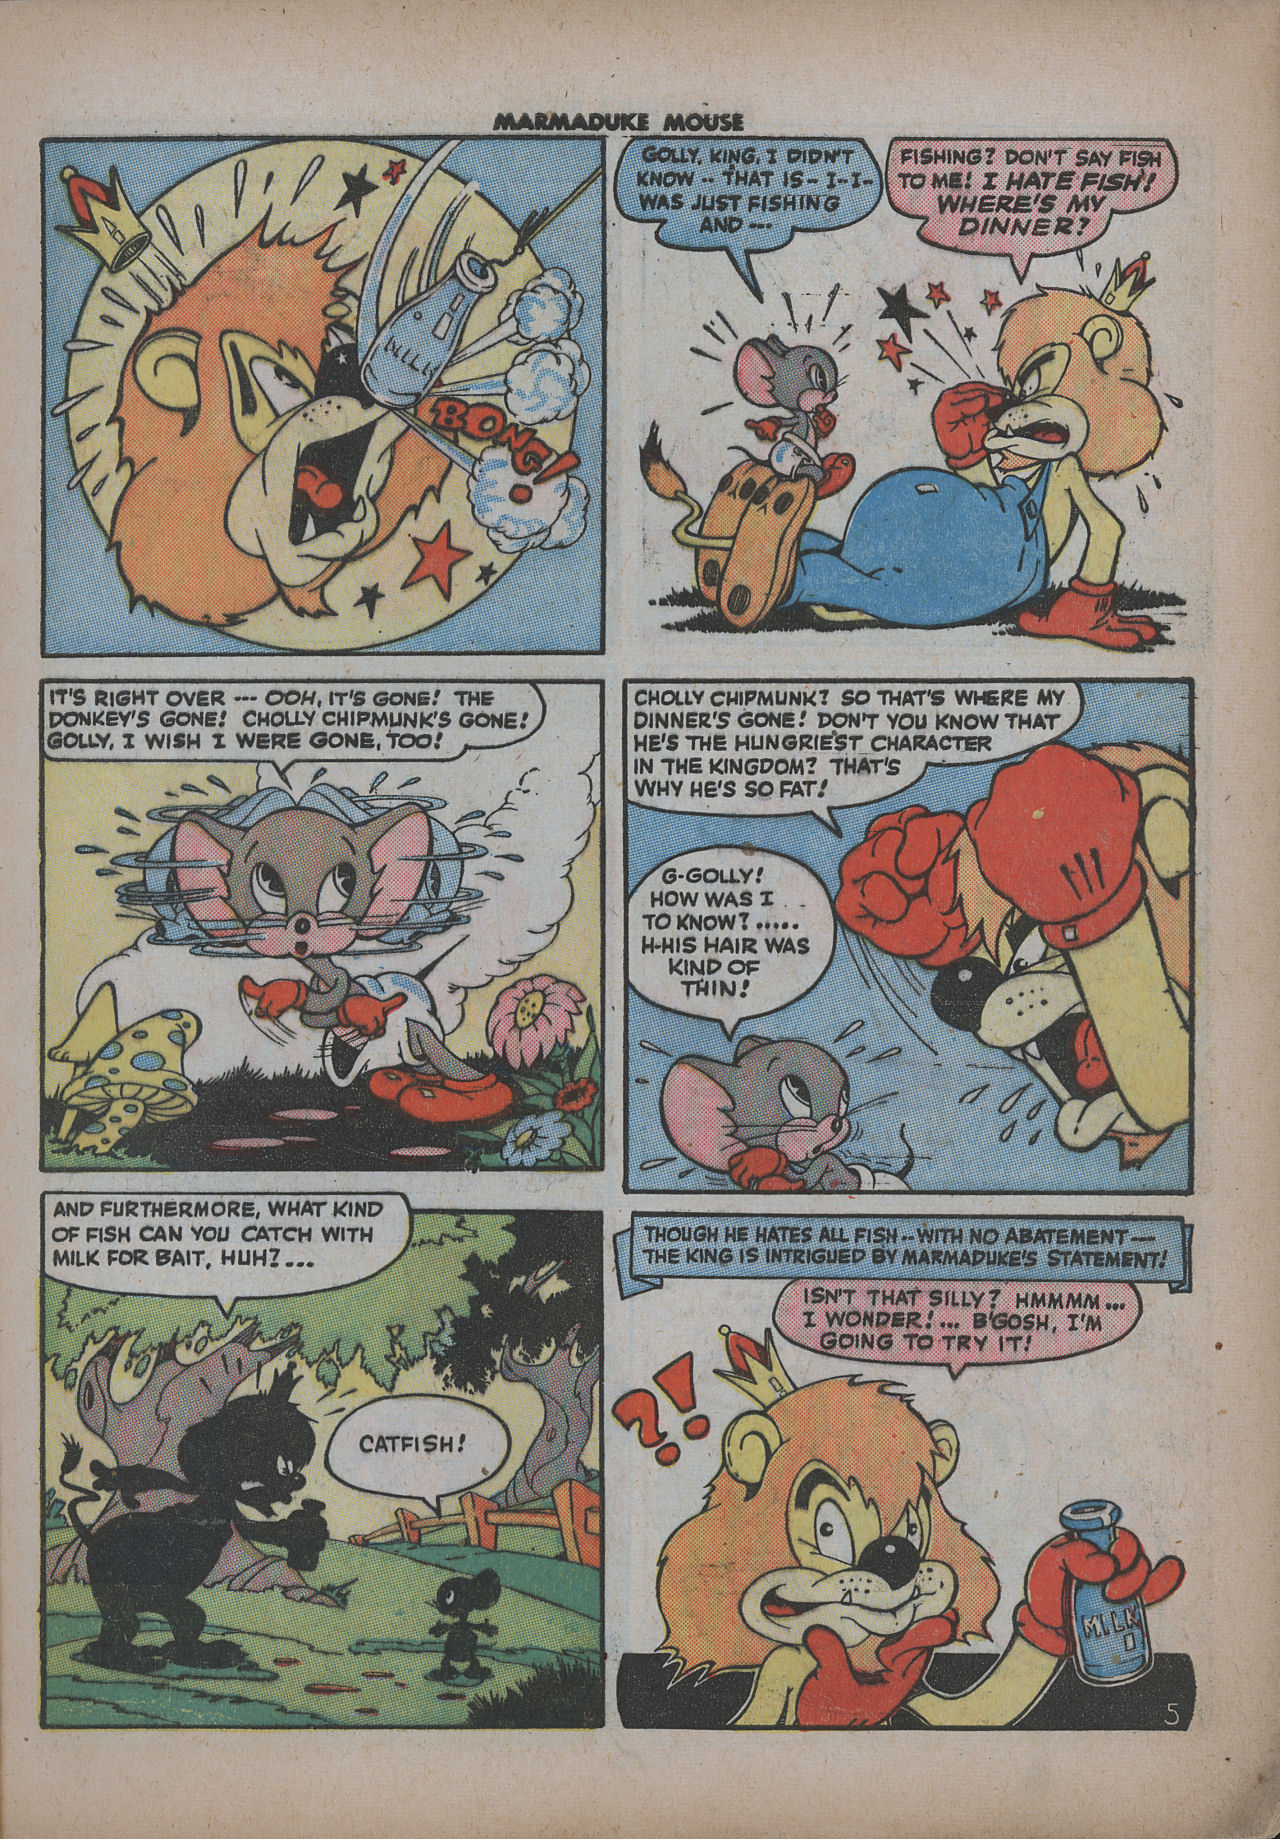 Read online Marmaduke Mouse comic -  Issue #1 - 8